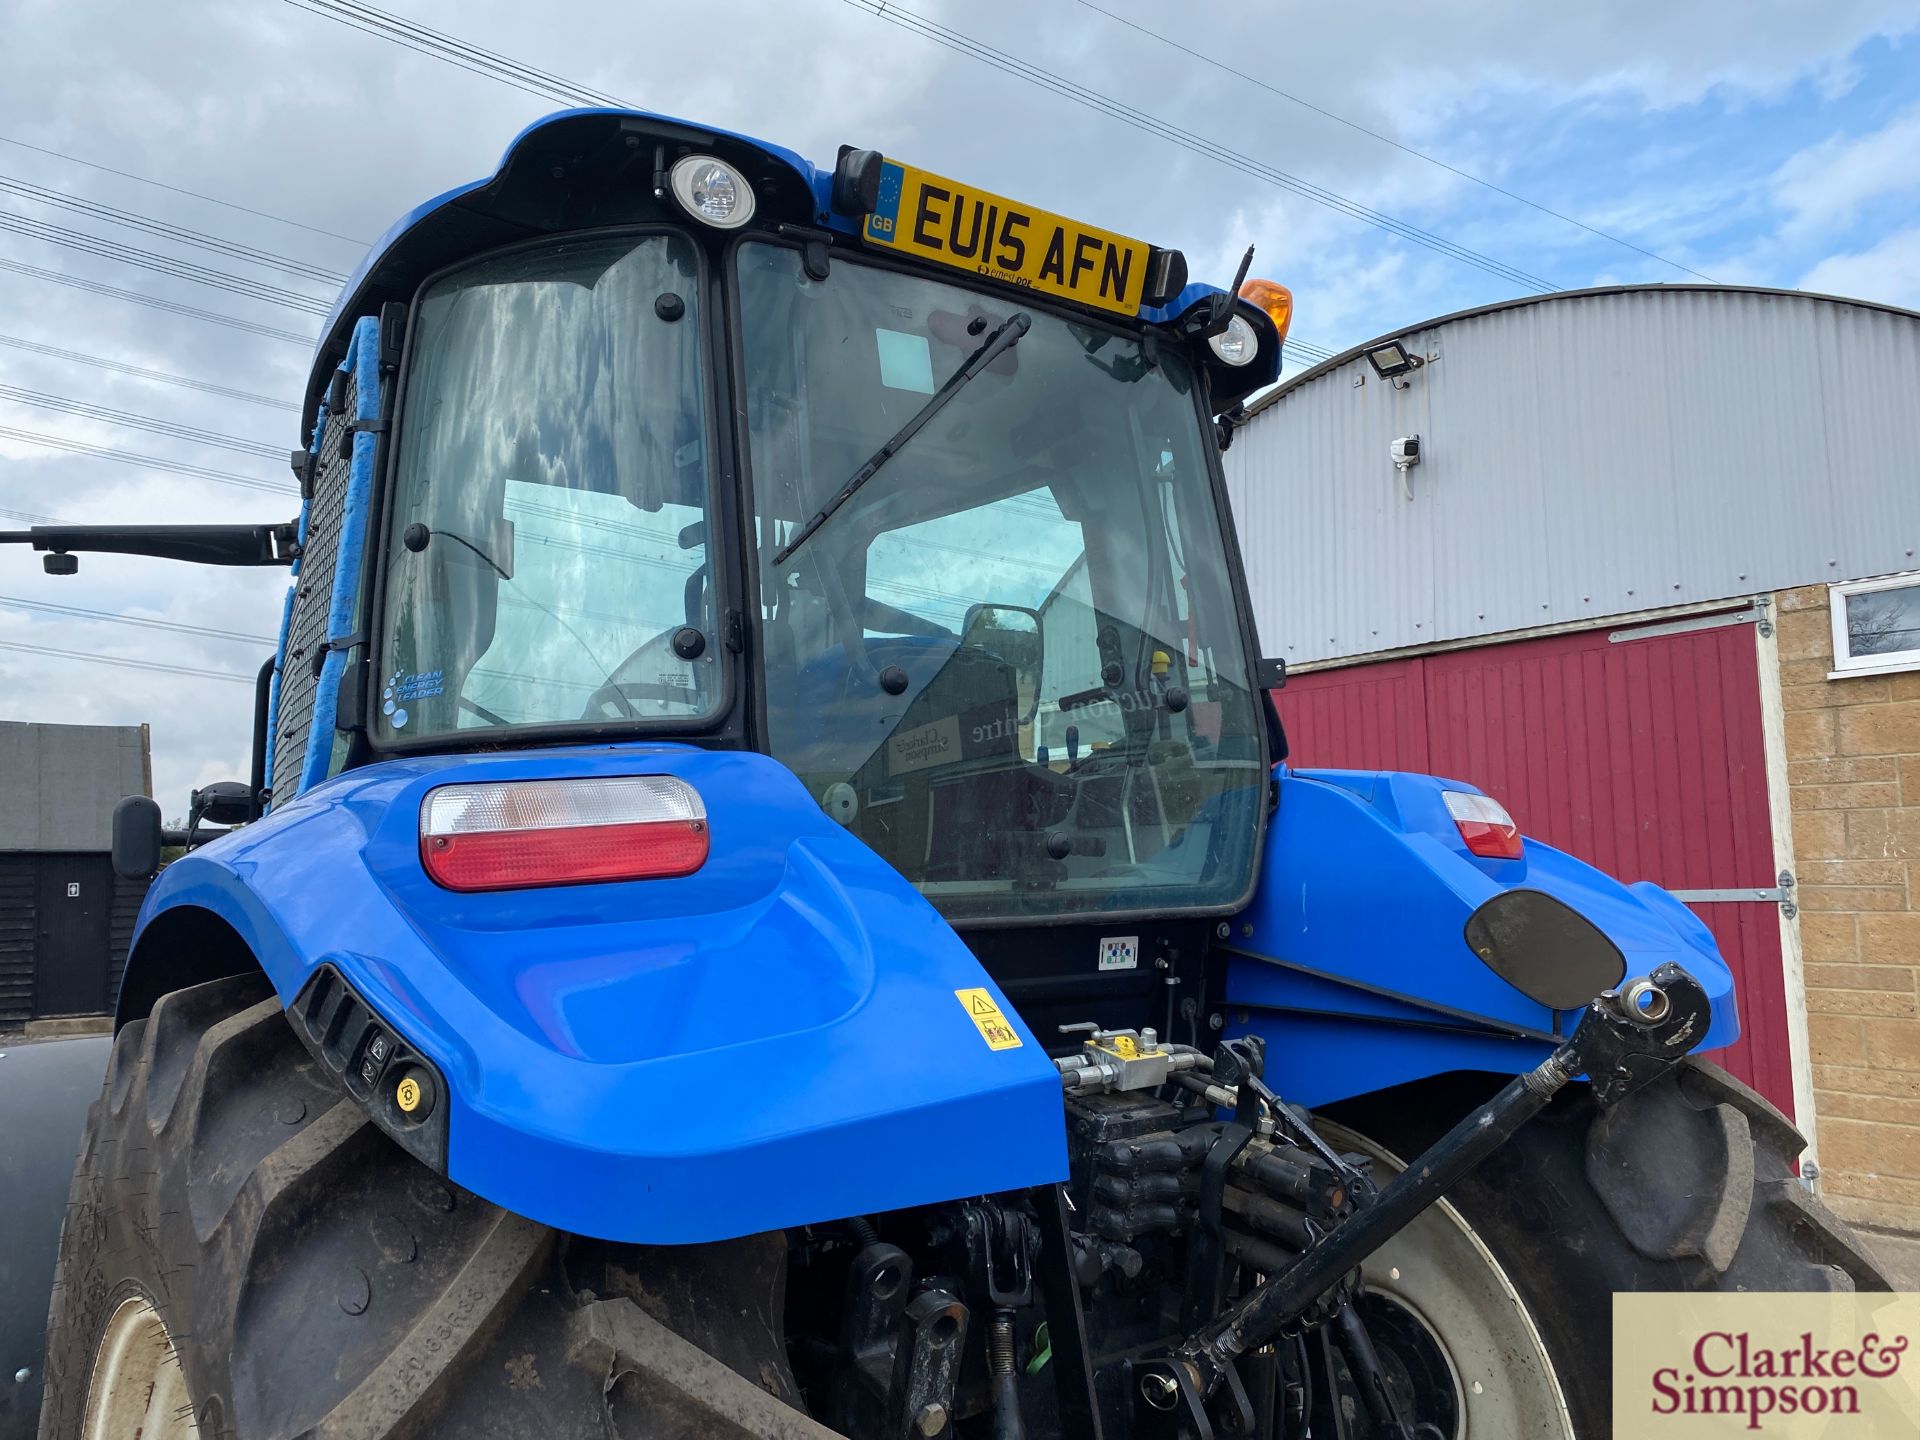 New Holland T5.105 4WD tractor. Registration EU15 AFN. Date of first registration 03/2015. Serial - Image 22 of 48